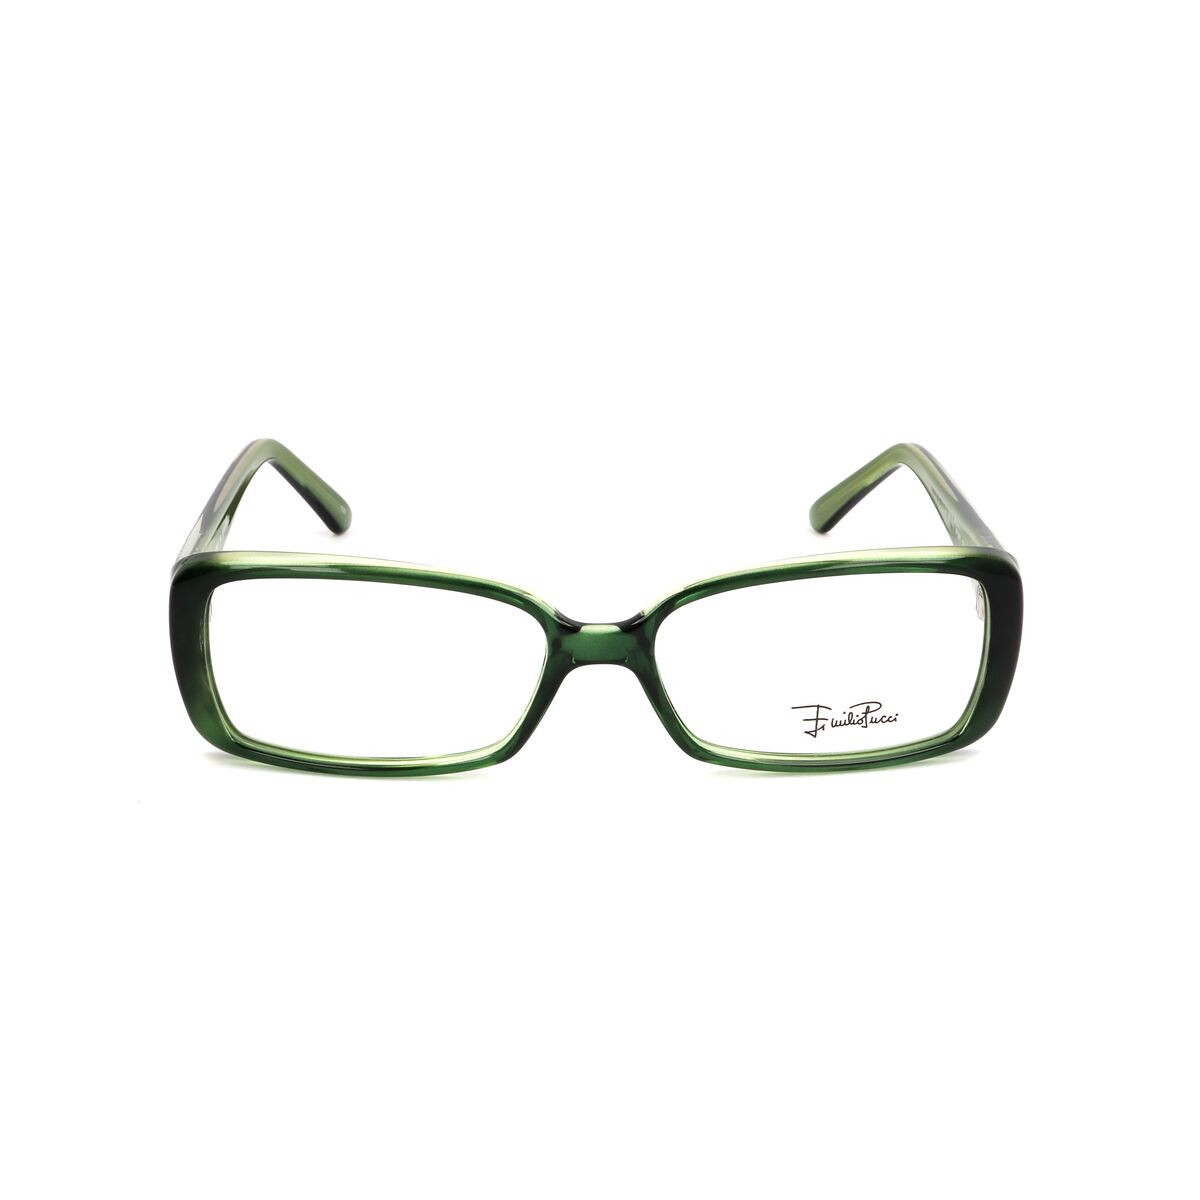 Ladies'Spectacle frame Emilio Pucci EP2661-304 Green